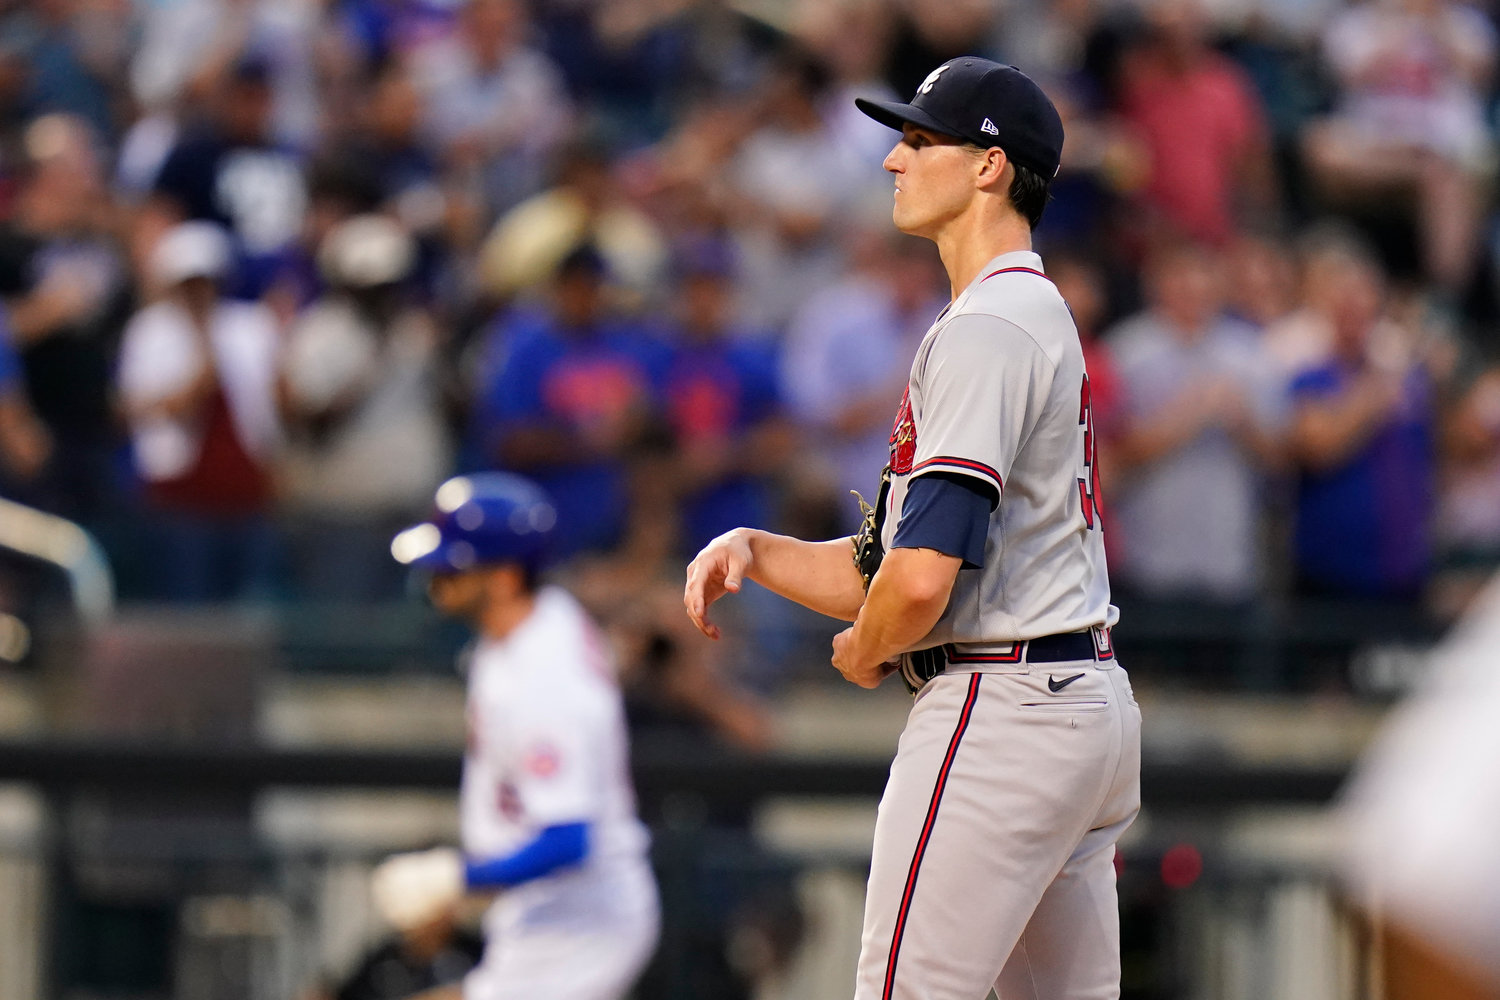 Atlanta Braves starting pitcher Kyle Wright, right, waits as New York Mets' Tyler Naquin runs the bases after hitting a home run during the second inning of a baseball game Thursday, Aug. 4, 2022, in New York. (AP Photo/Frank Franklin II)